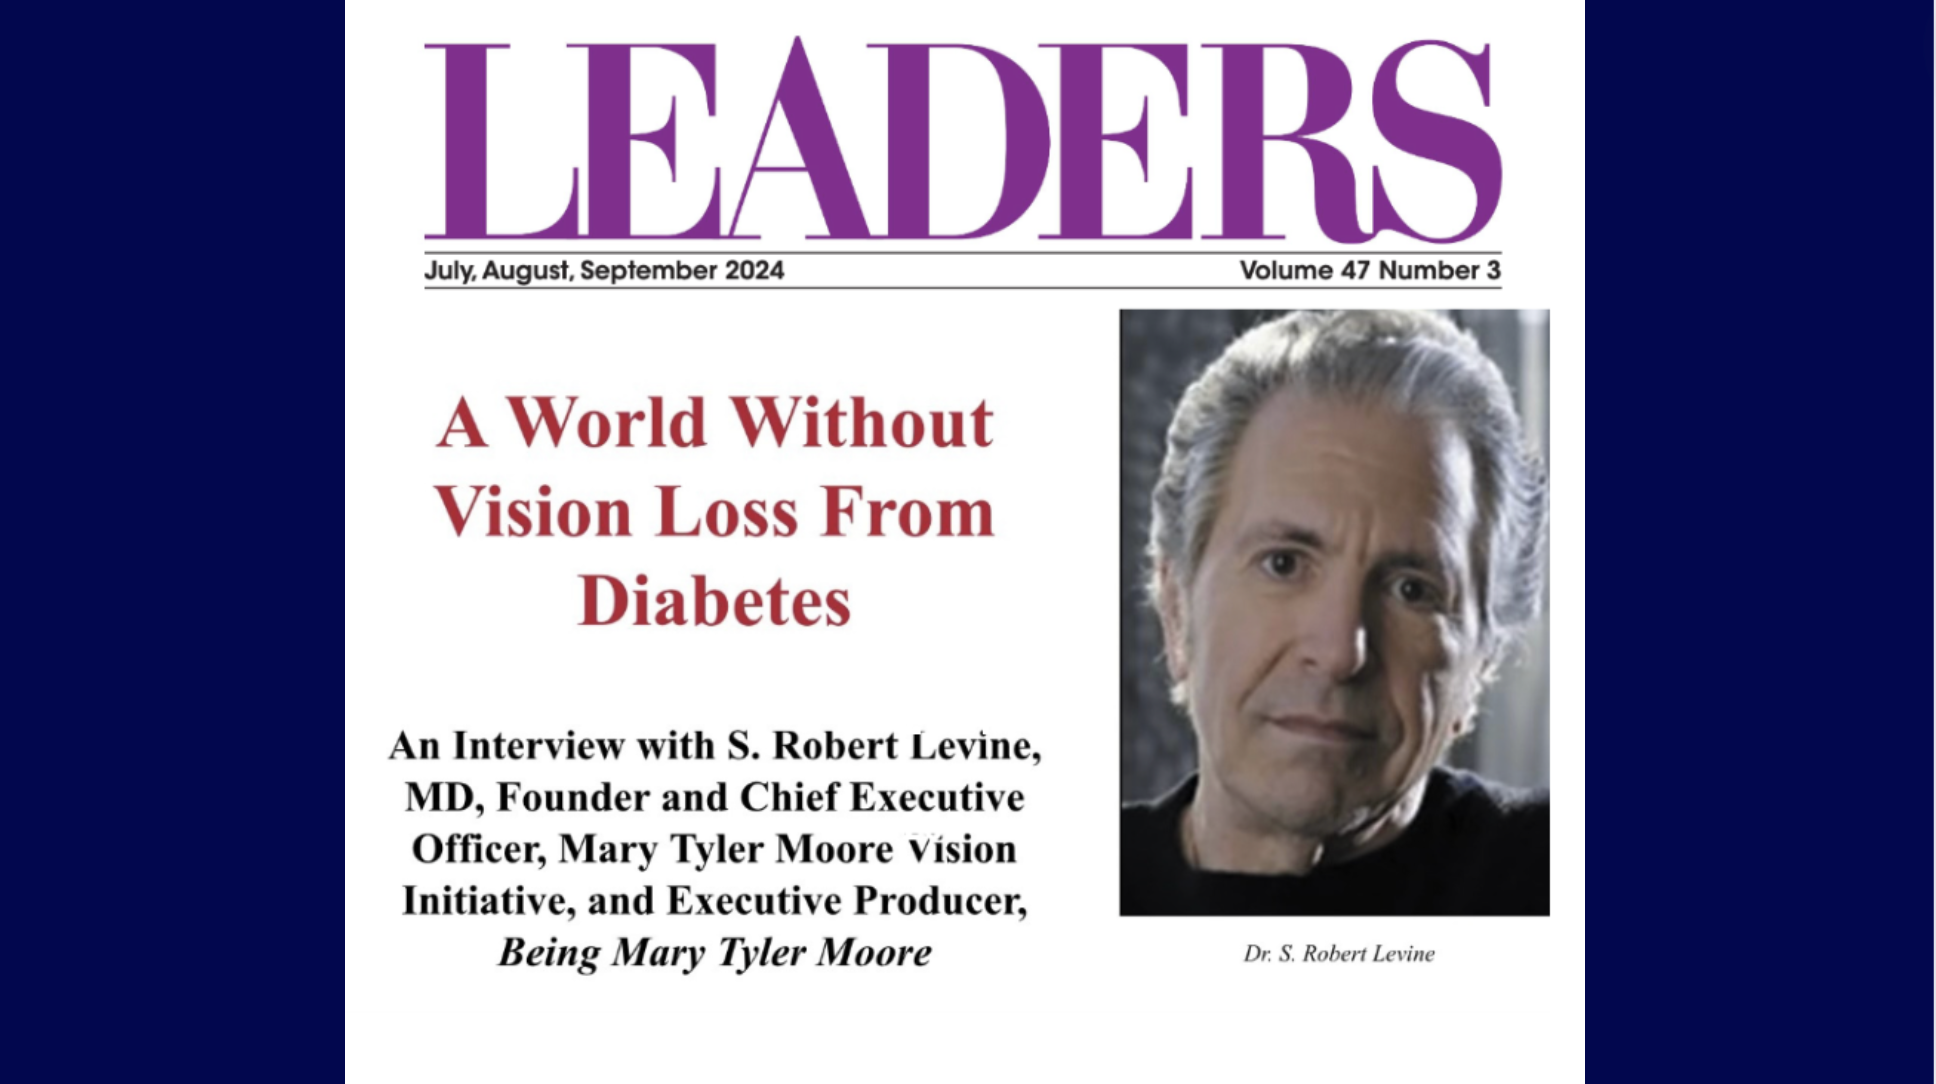 MTM Vision’s Founder and CEO, Dr. S. Robert Levine is featured in 